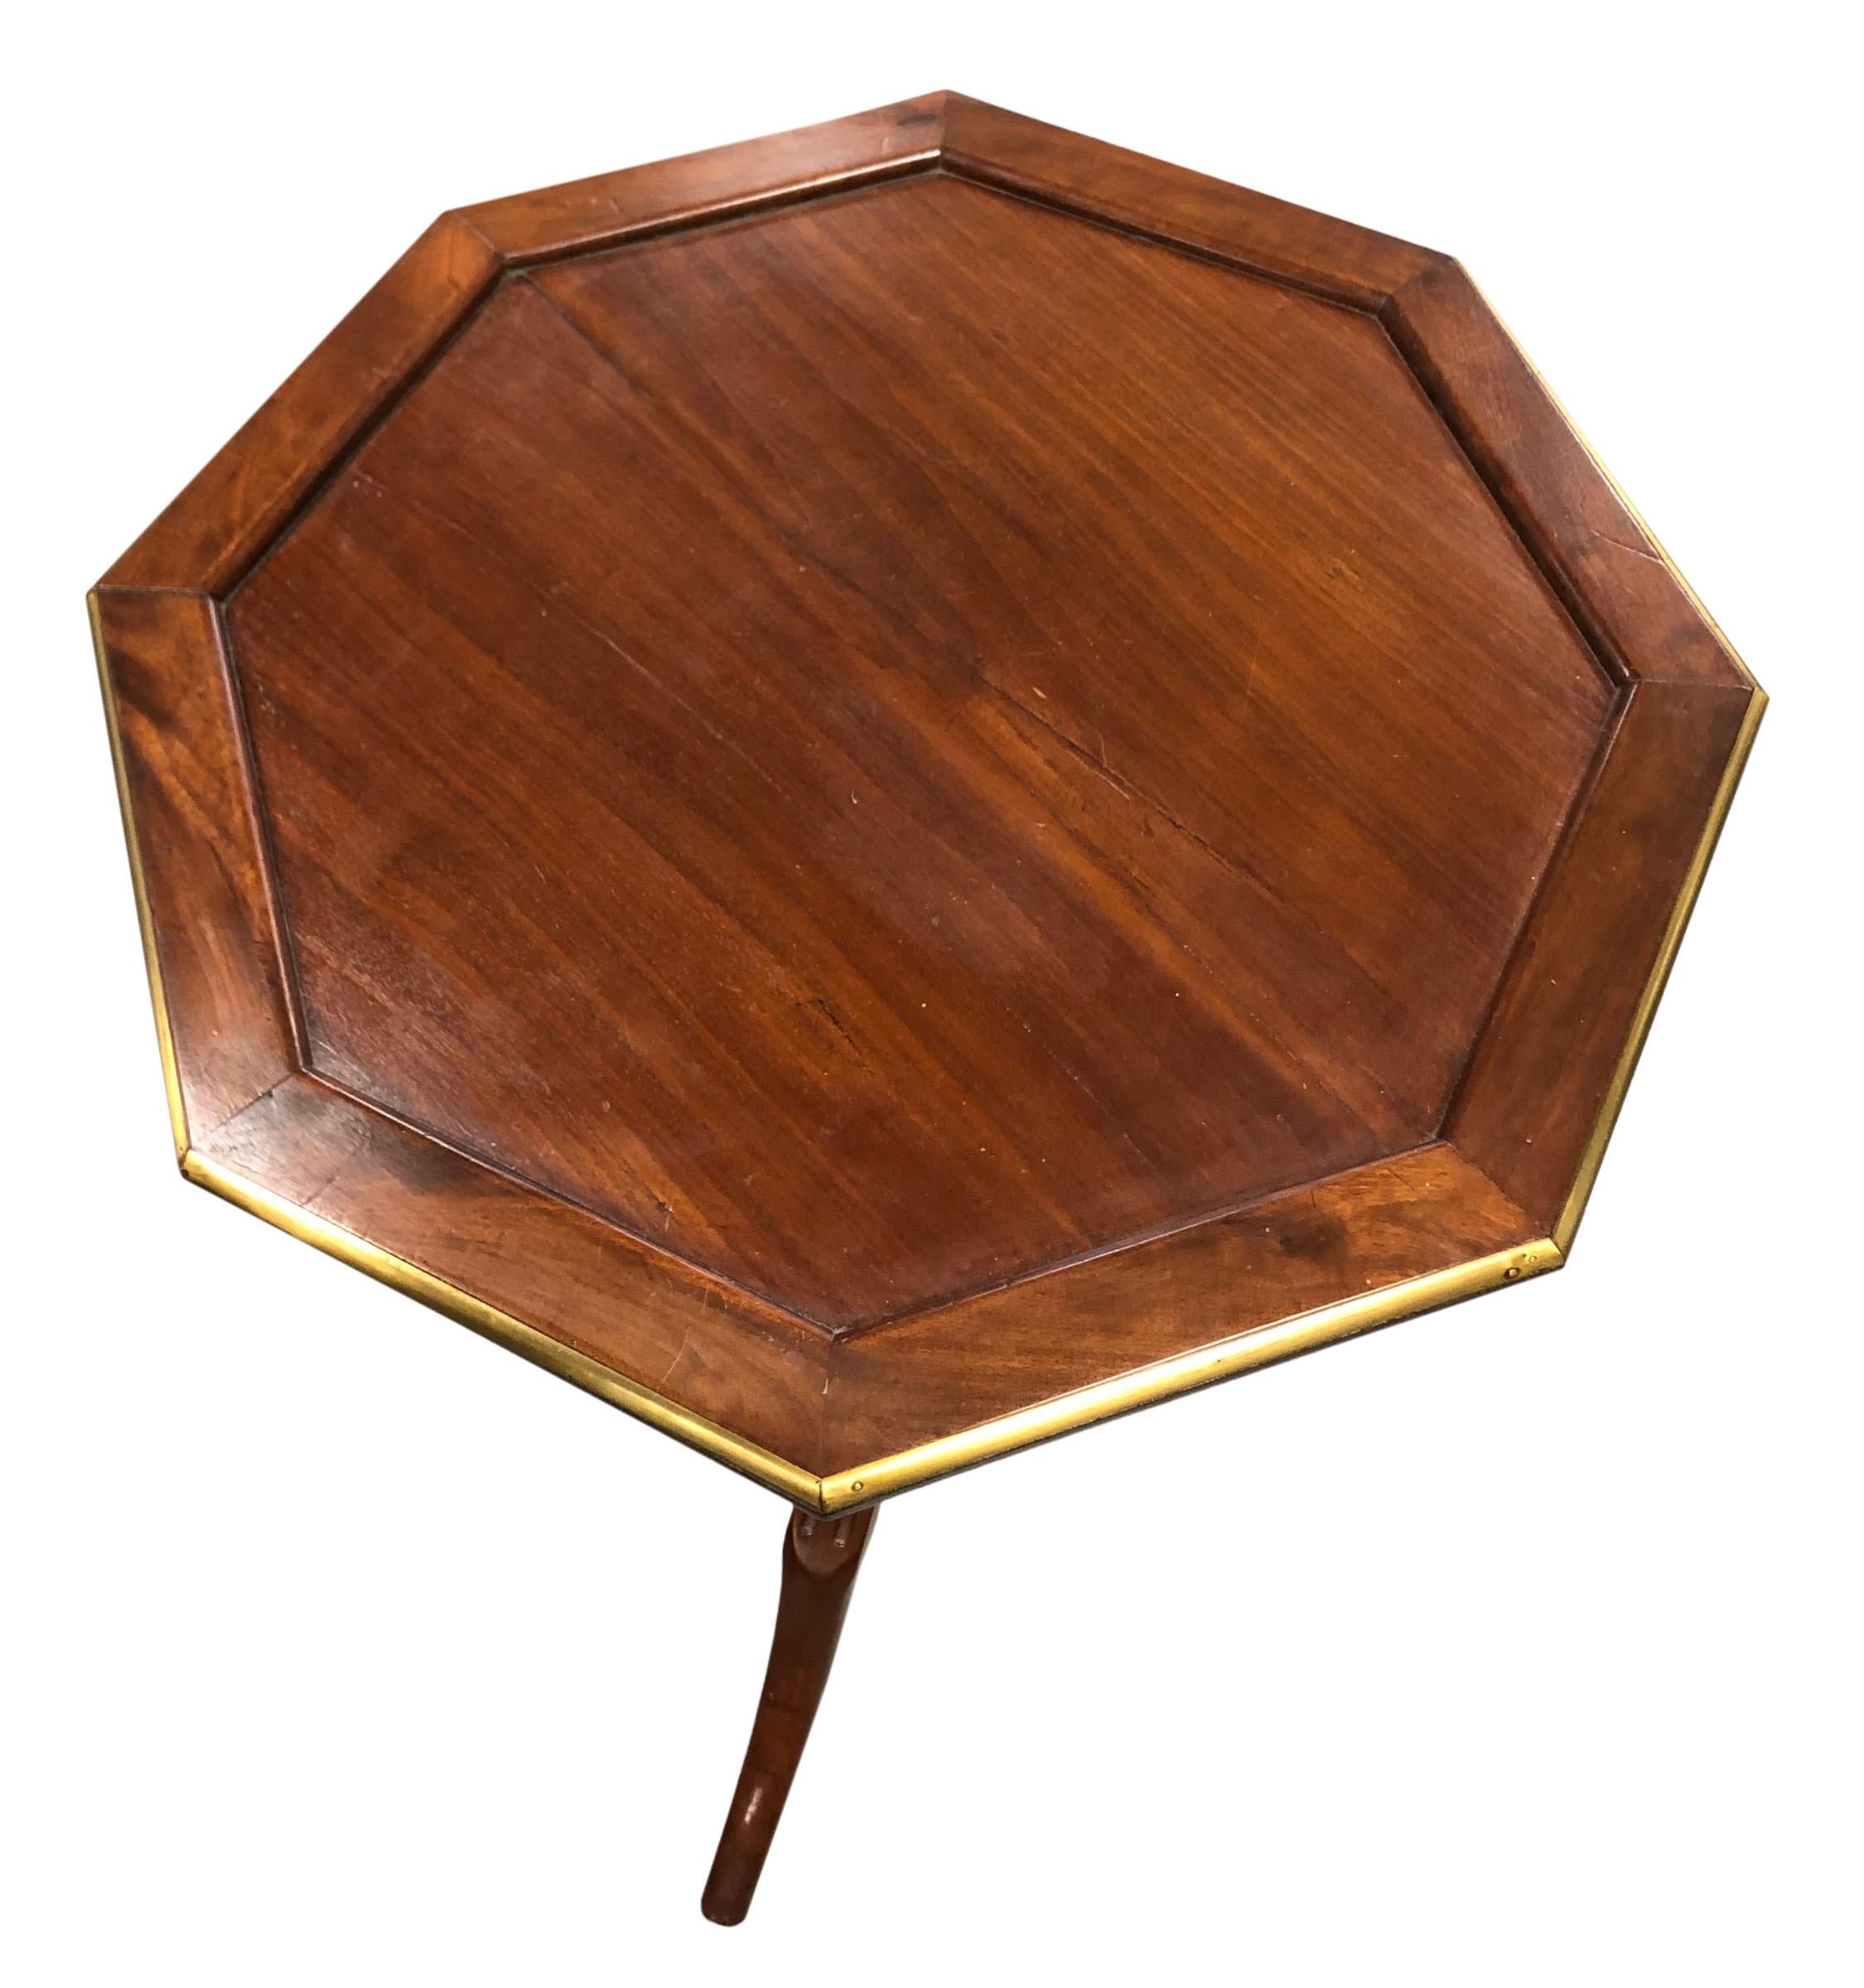 An 18th century octagon shape side table from France. Wood with a beautiful brass edge and is on wheels. It’s not in its original state it used to be a tilt top now it is stationary.